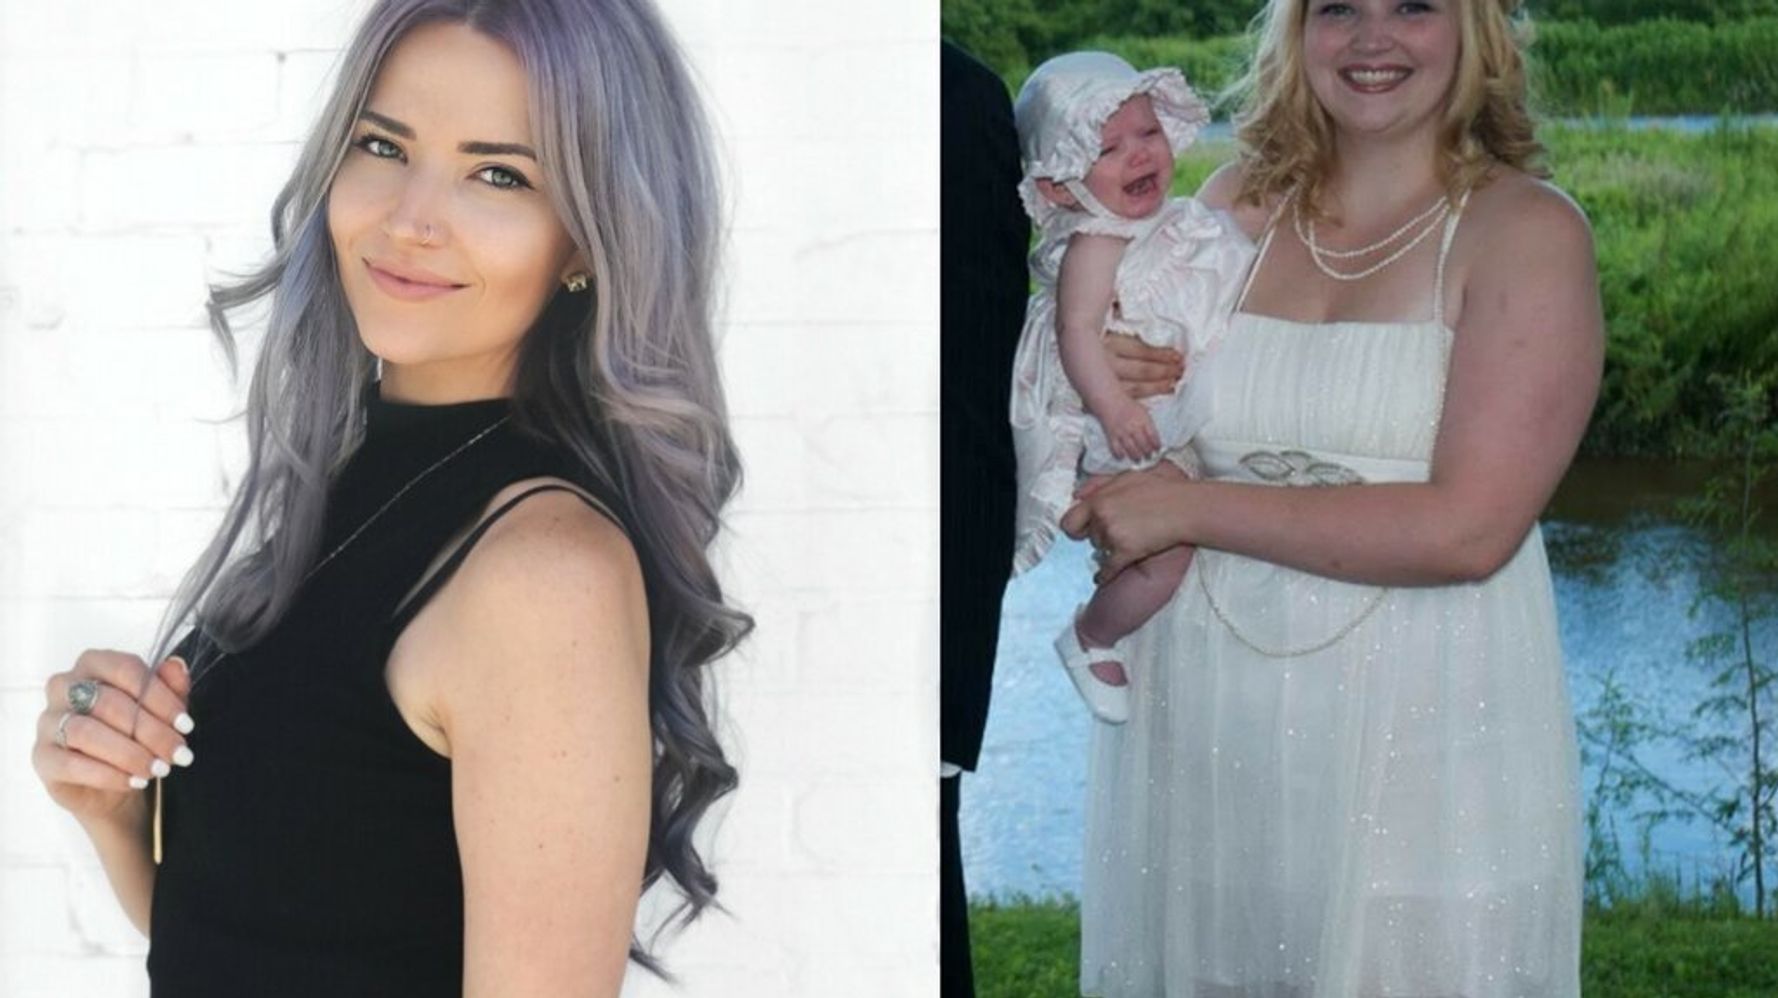 A Facebook Photo Prompted This Woman To Get Healthy And Become A